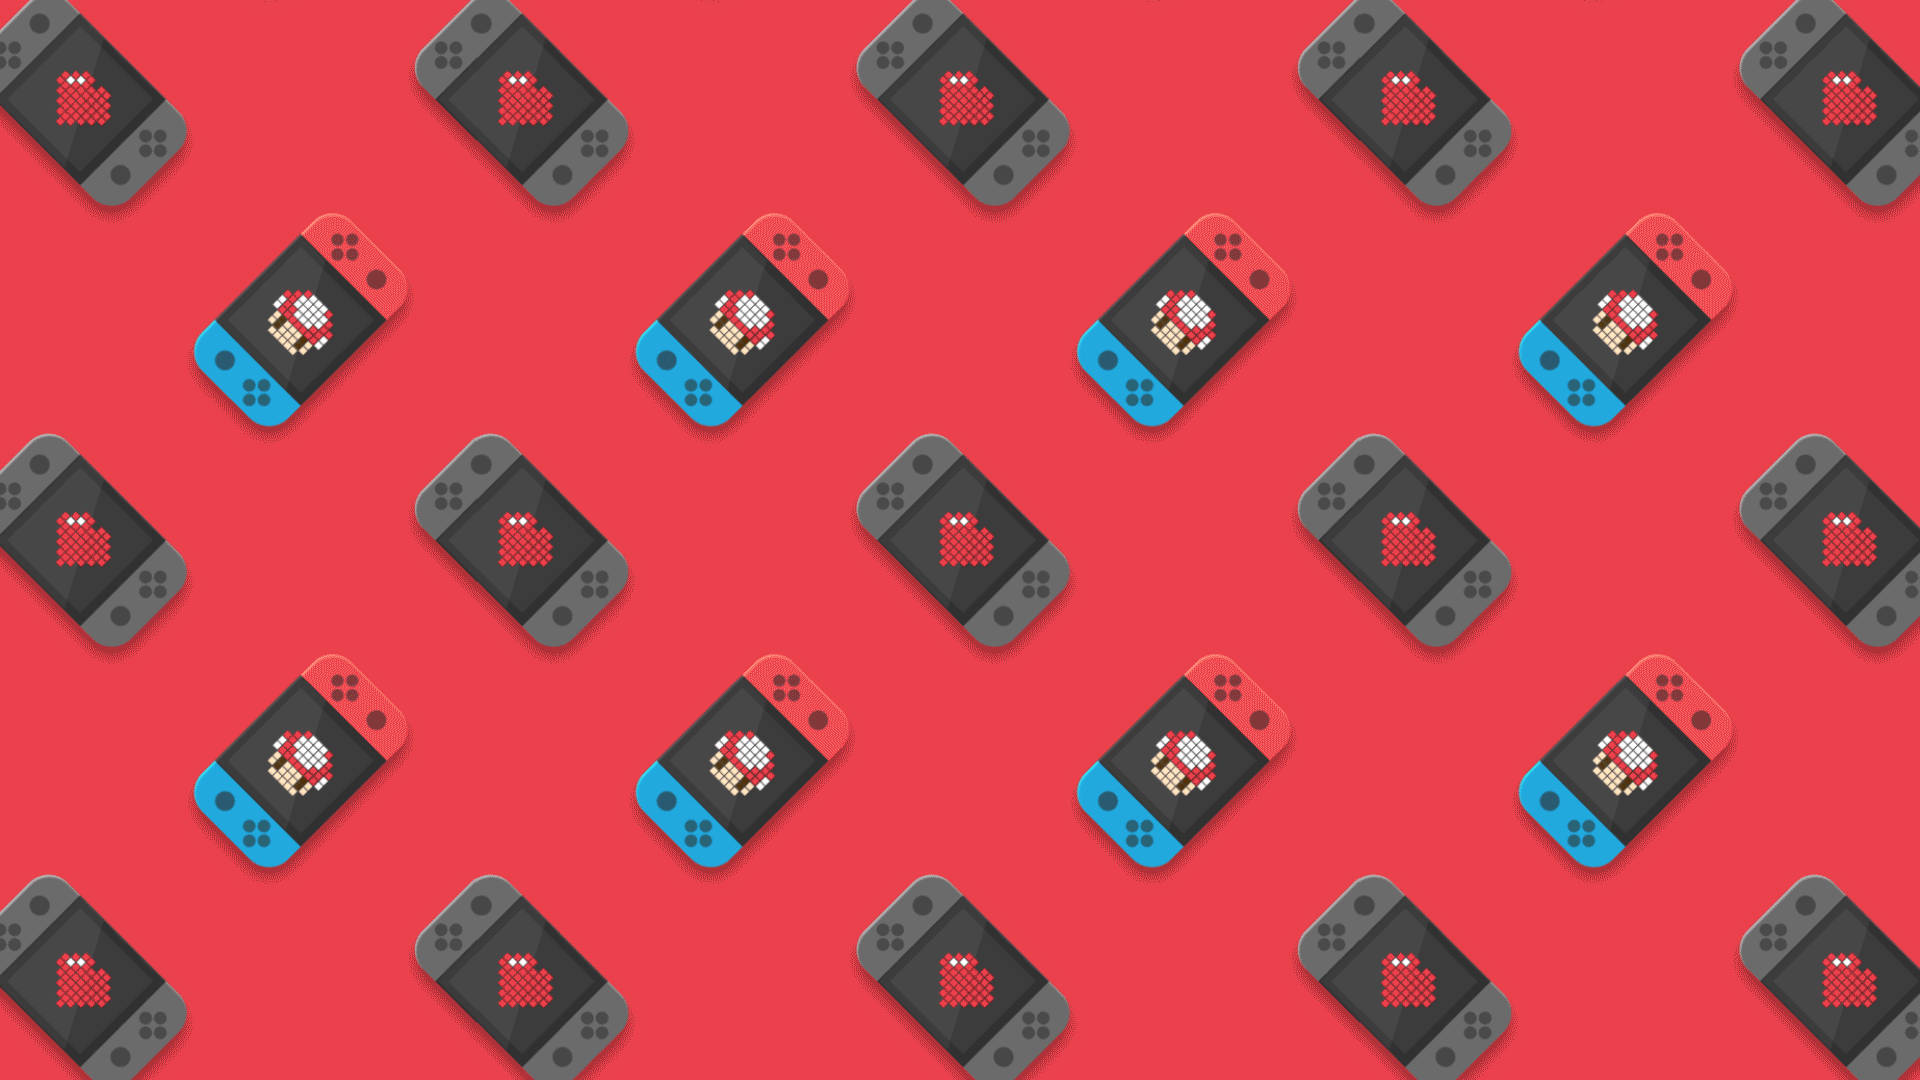 Nintendo Switch Controllers Wallpaper